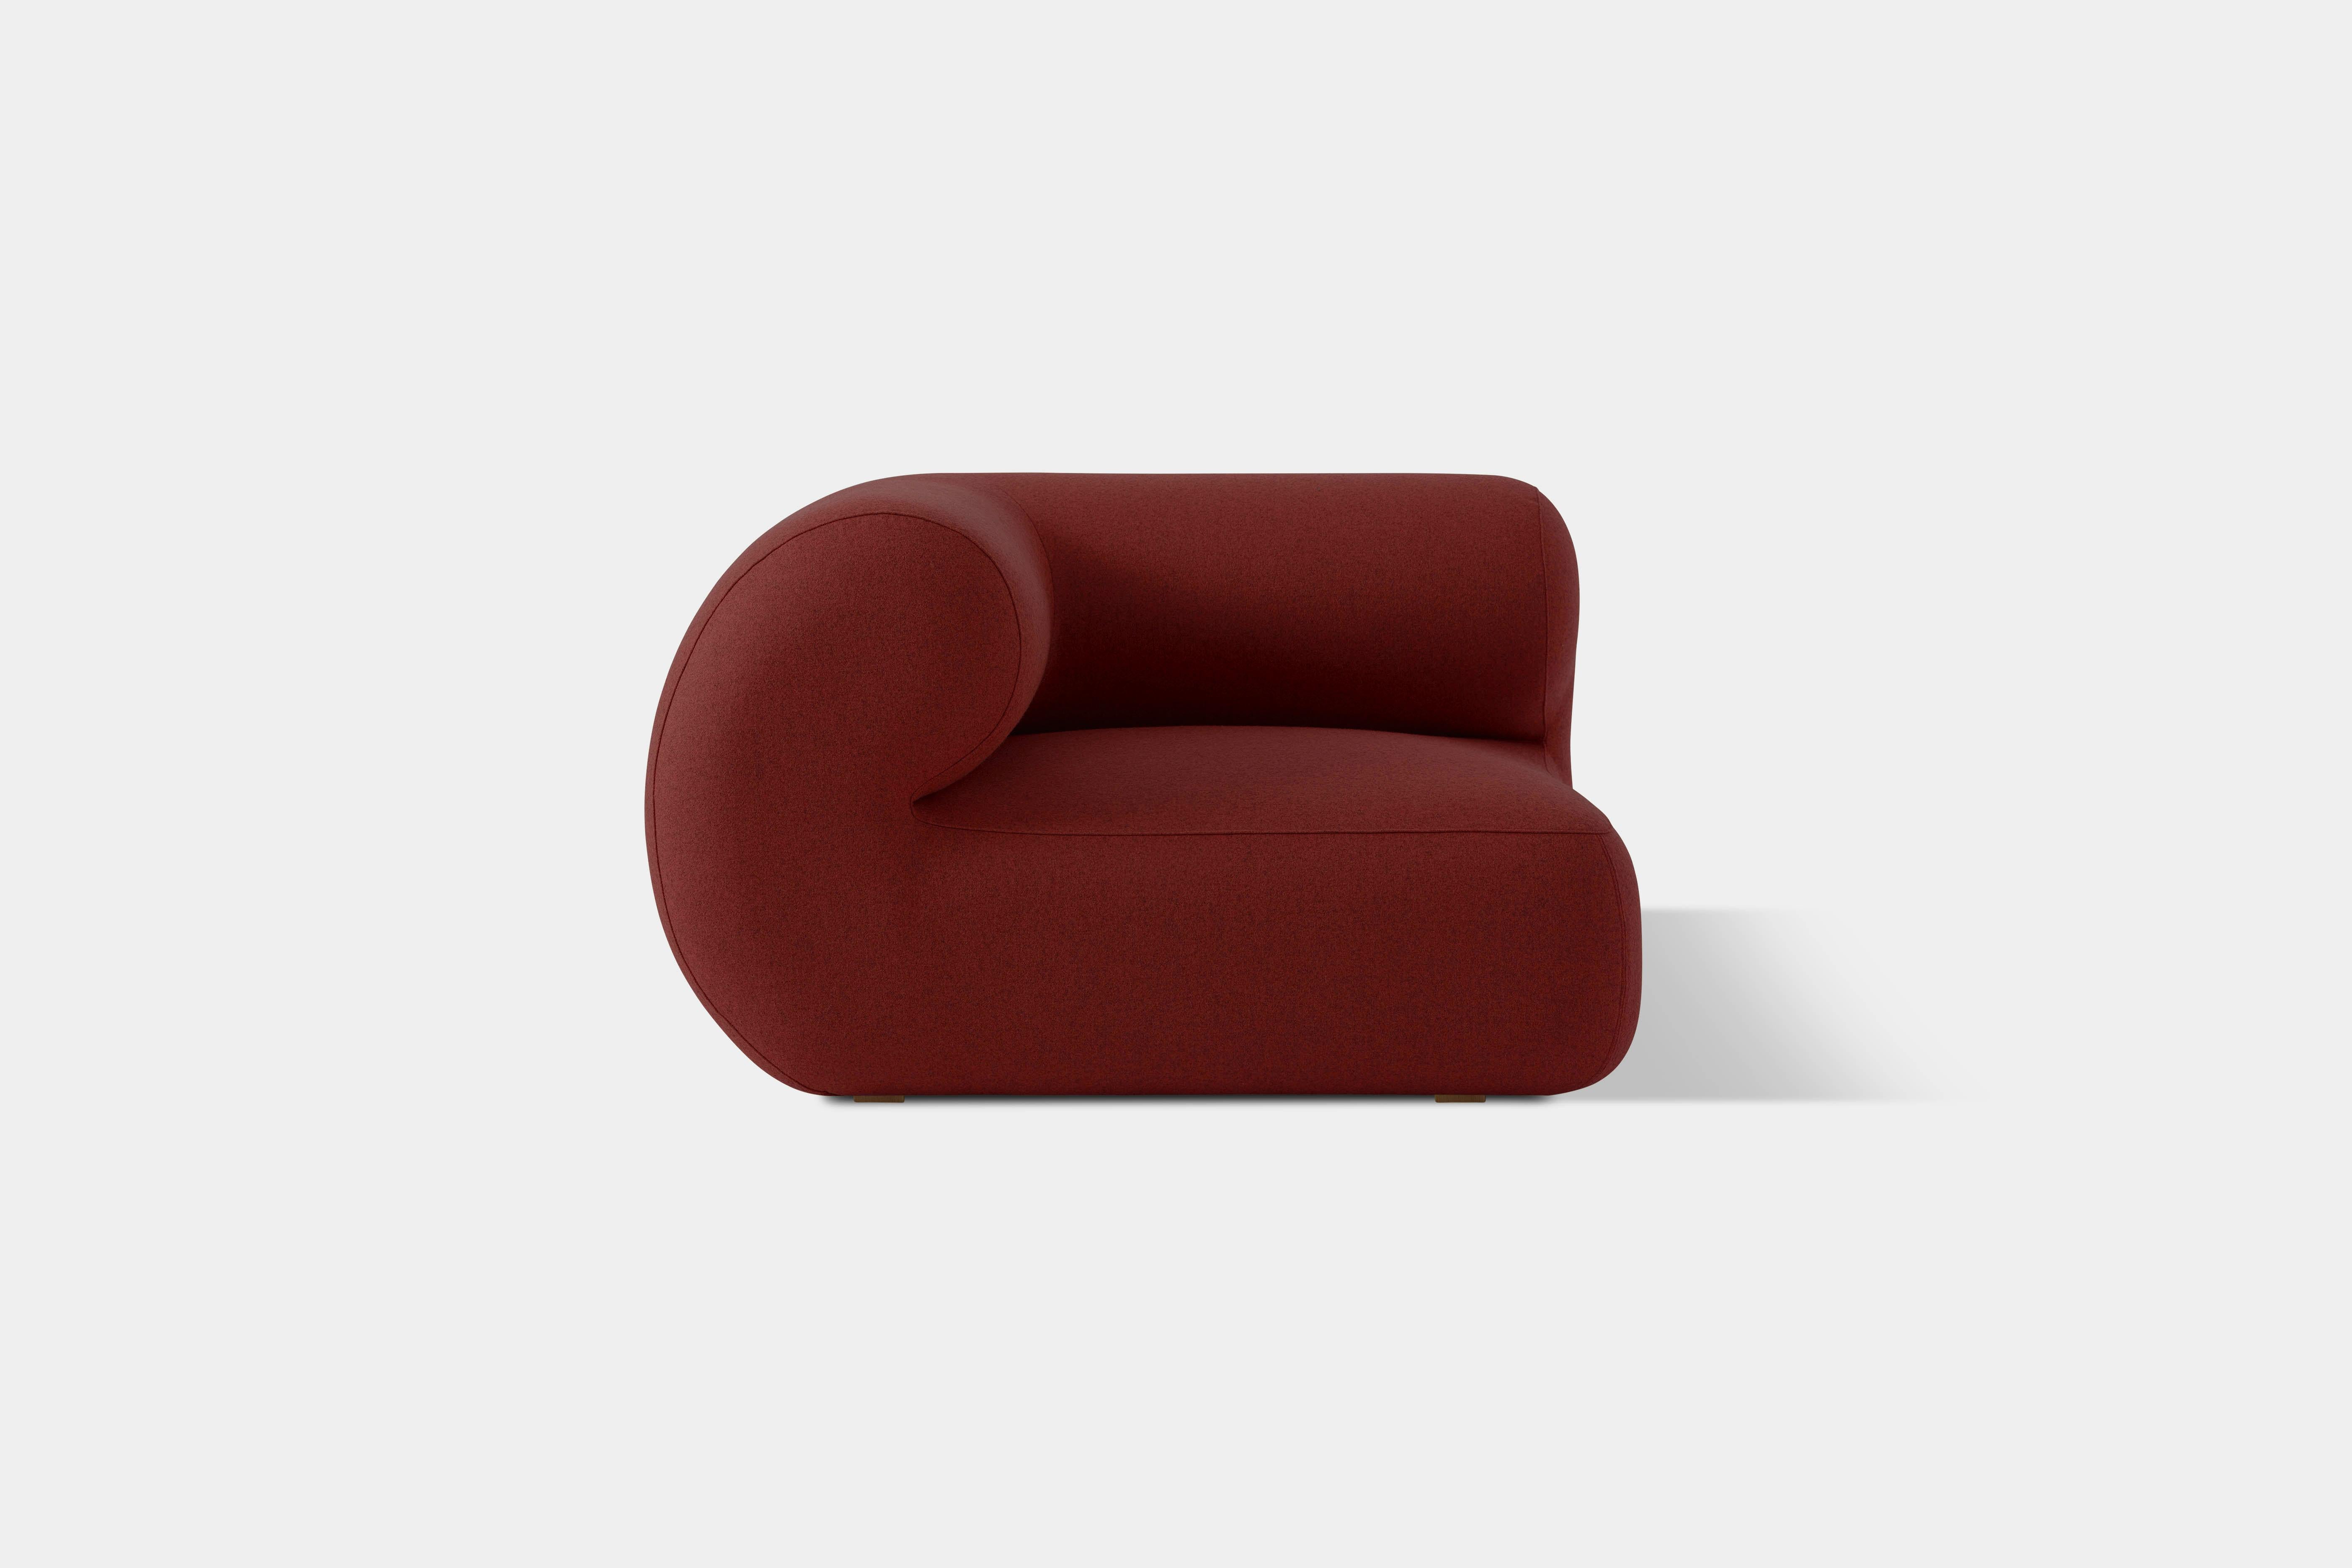 Red Michelin Corner Module by Pepe Albargues
Dimensions: W 103 x D 113 x H 71 cm
Materials: Pinewood, plywood and tablex structure.
Foam CMHR (high resilience and flame retardant) for all our cushion filling systems.
Lacquered beech wood